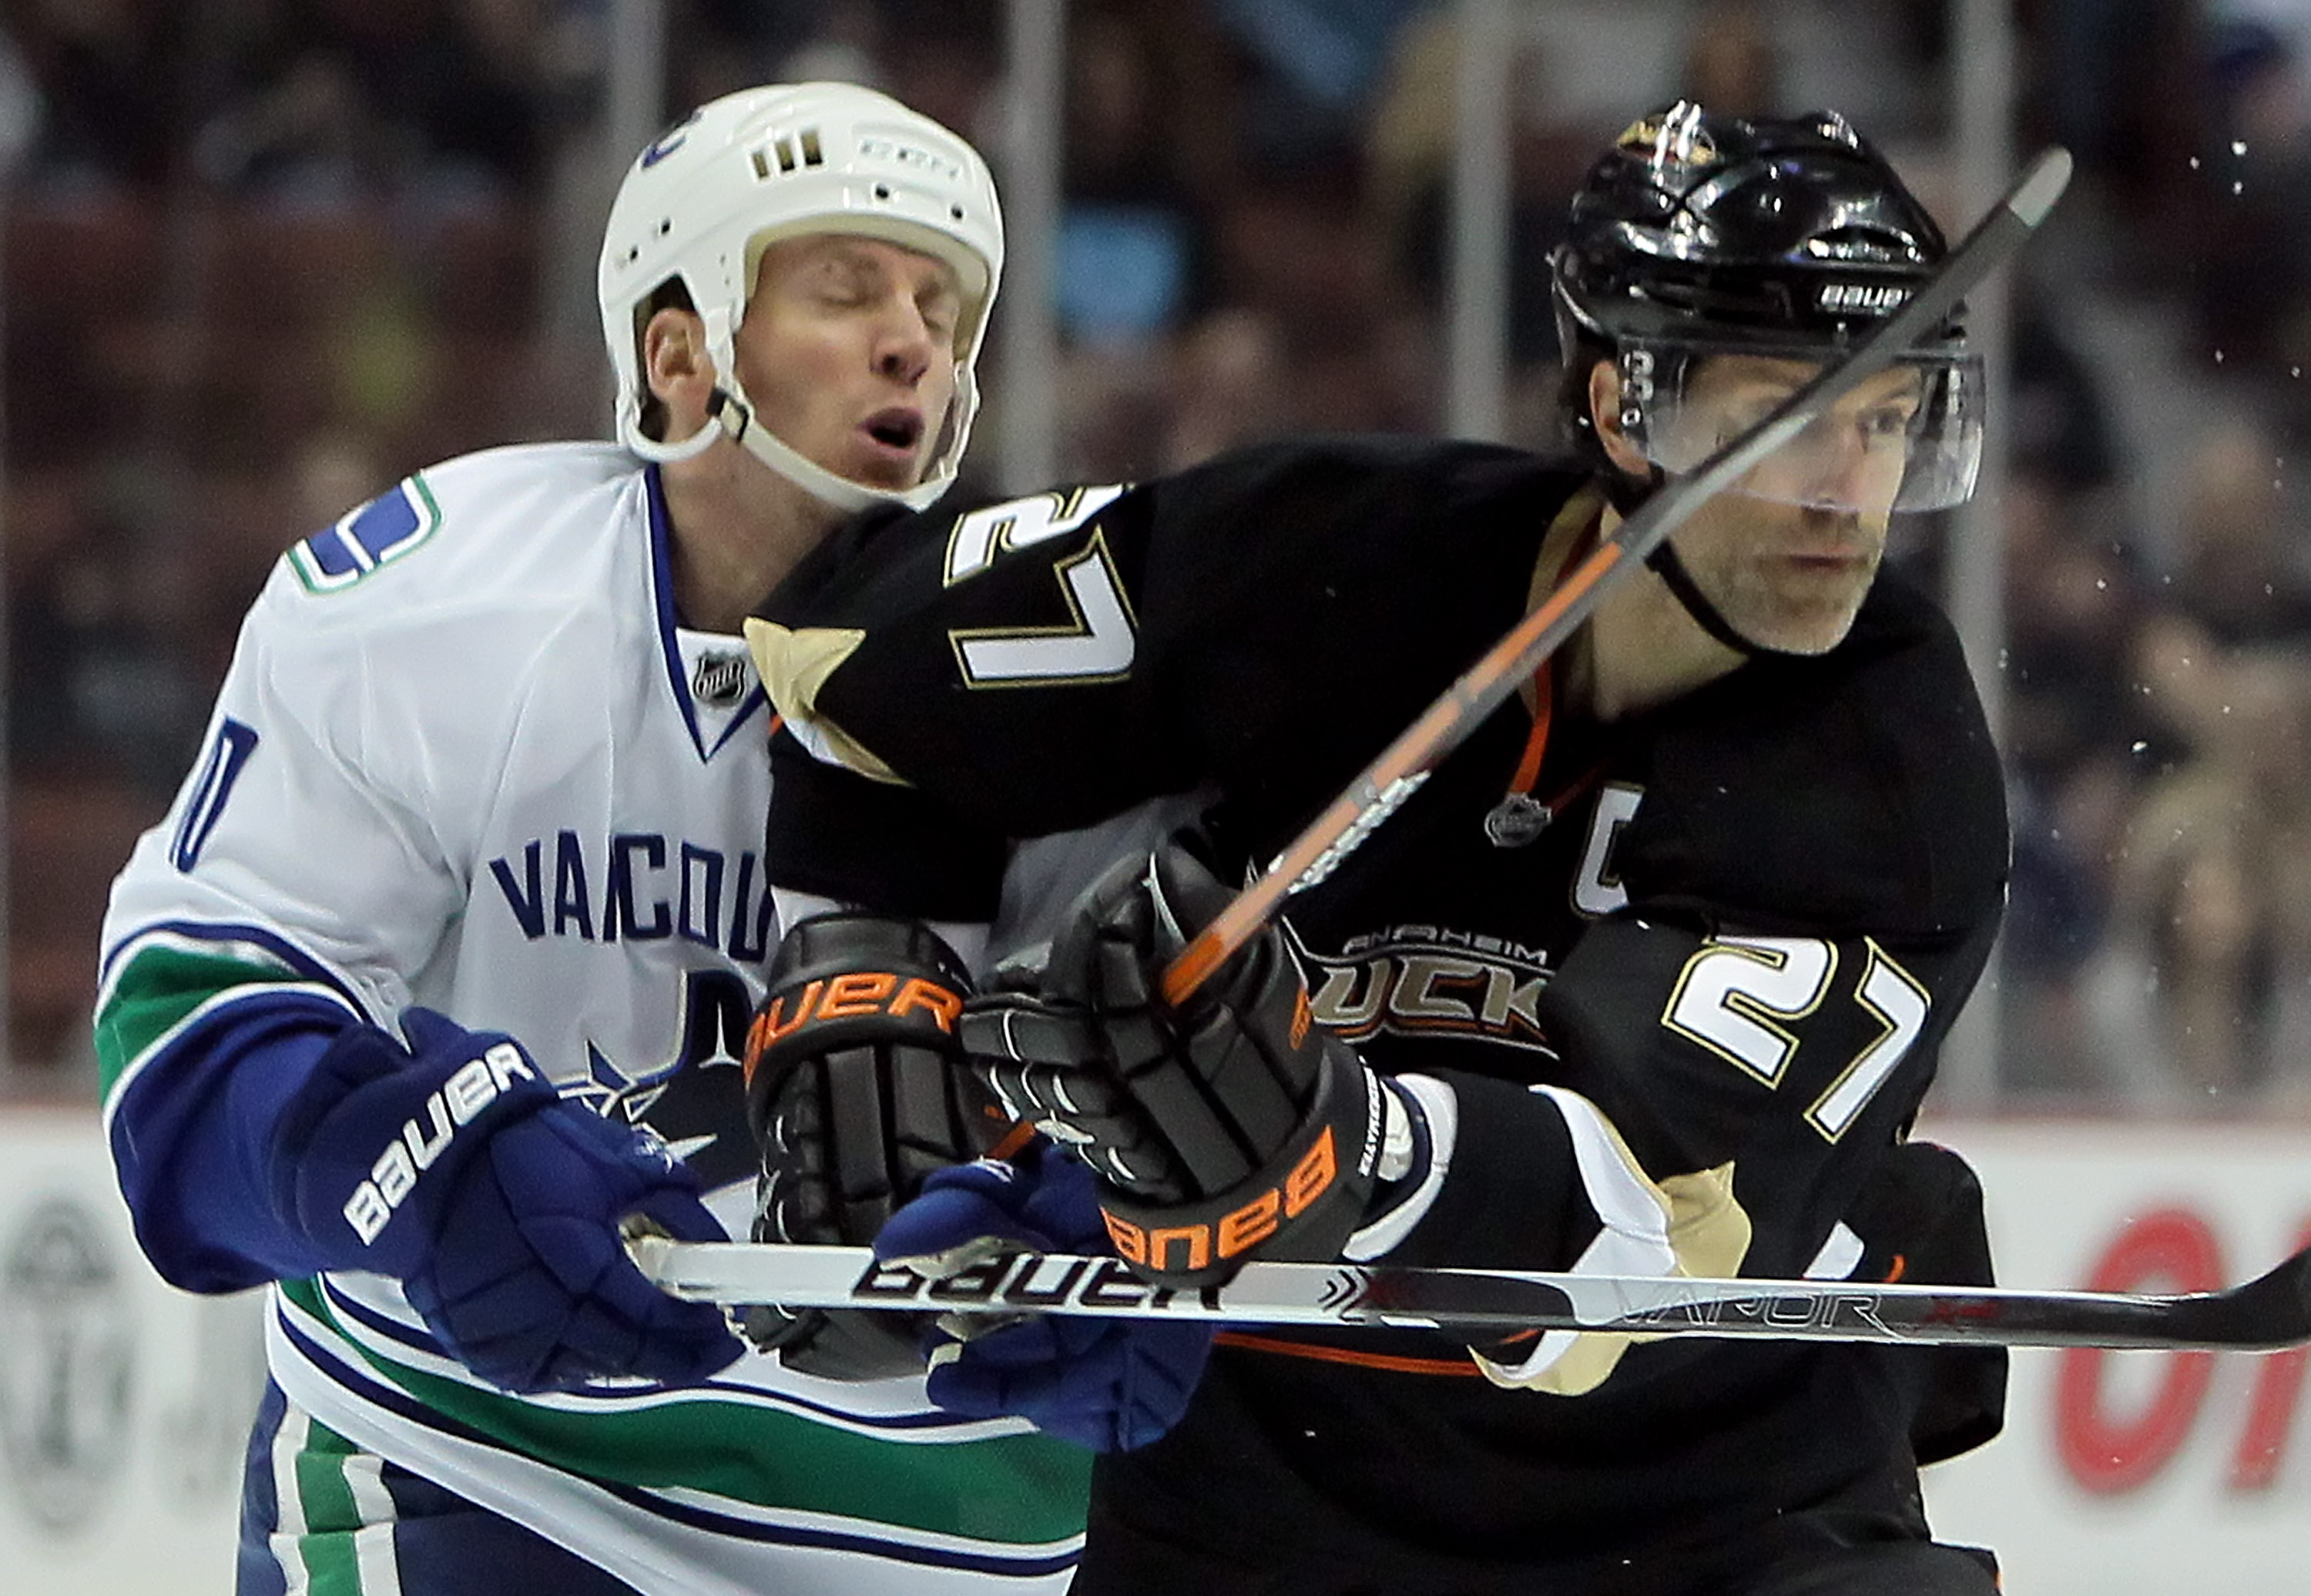 ANAHEIM, CA - APRIL 02:  Ryan Johnson #10 of the Vancouver Canucks is elbowed by Scott Niedermayer #27 of the Anaheim Ducks in the first period at the Honda Center on April 2, 2010 in Anaheim, California.  (Photo by Jeff Gross/Getty Images)